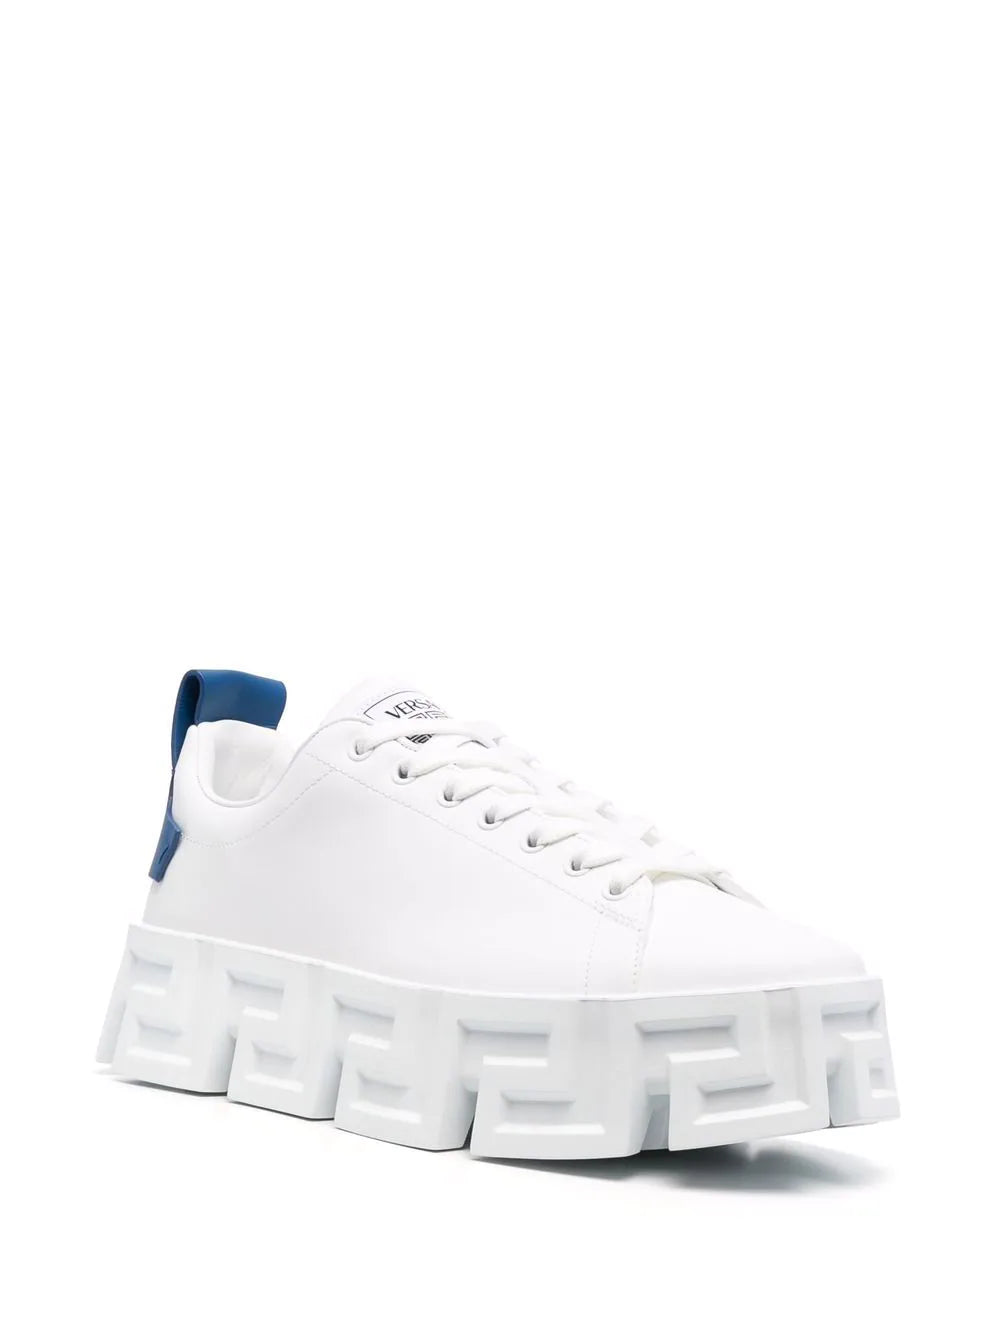 Versace Greca Labyrinth Low-Top Sneakers White / Blue